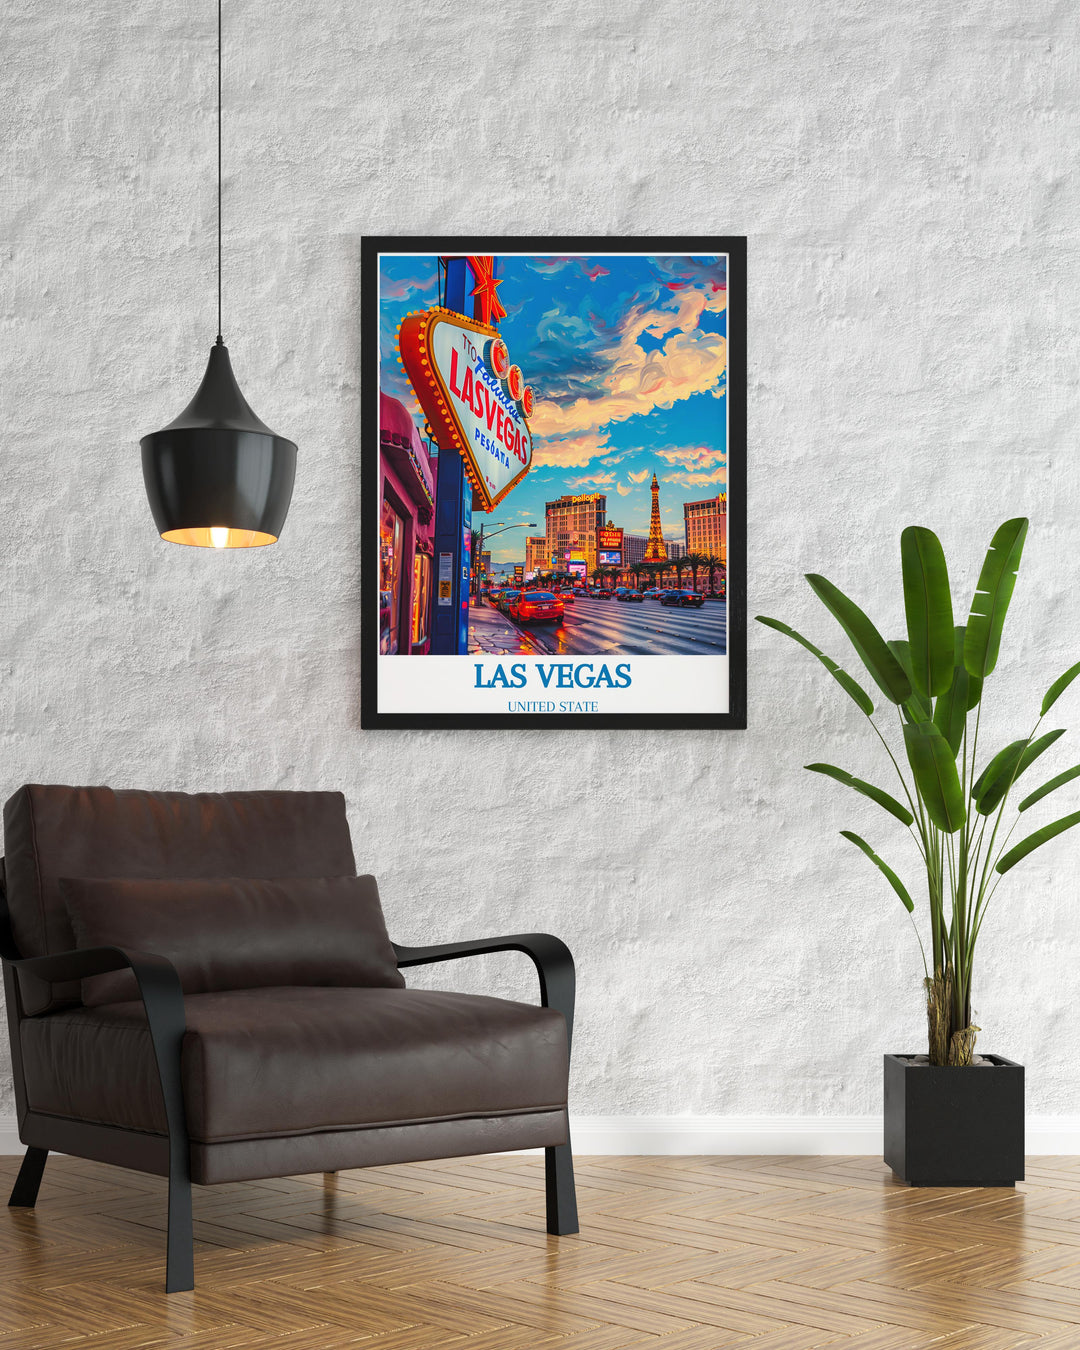 Las Vegas cityscape print highlighting the neon lights and casino facades, perfect for creating a focal point in entertainment spaces.